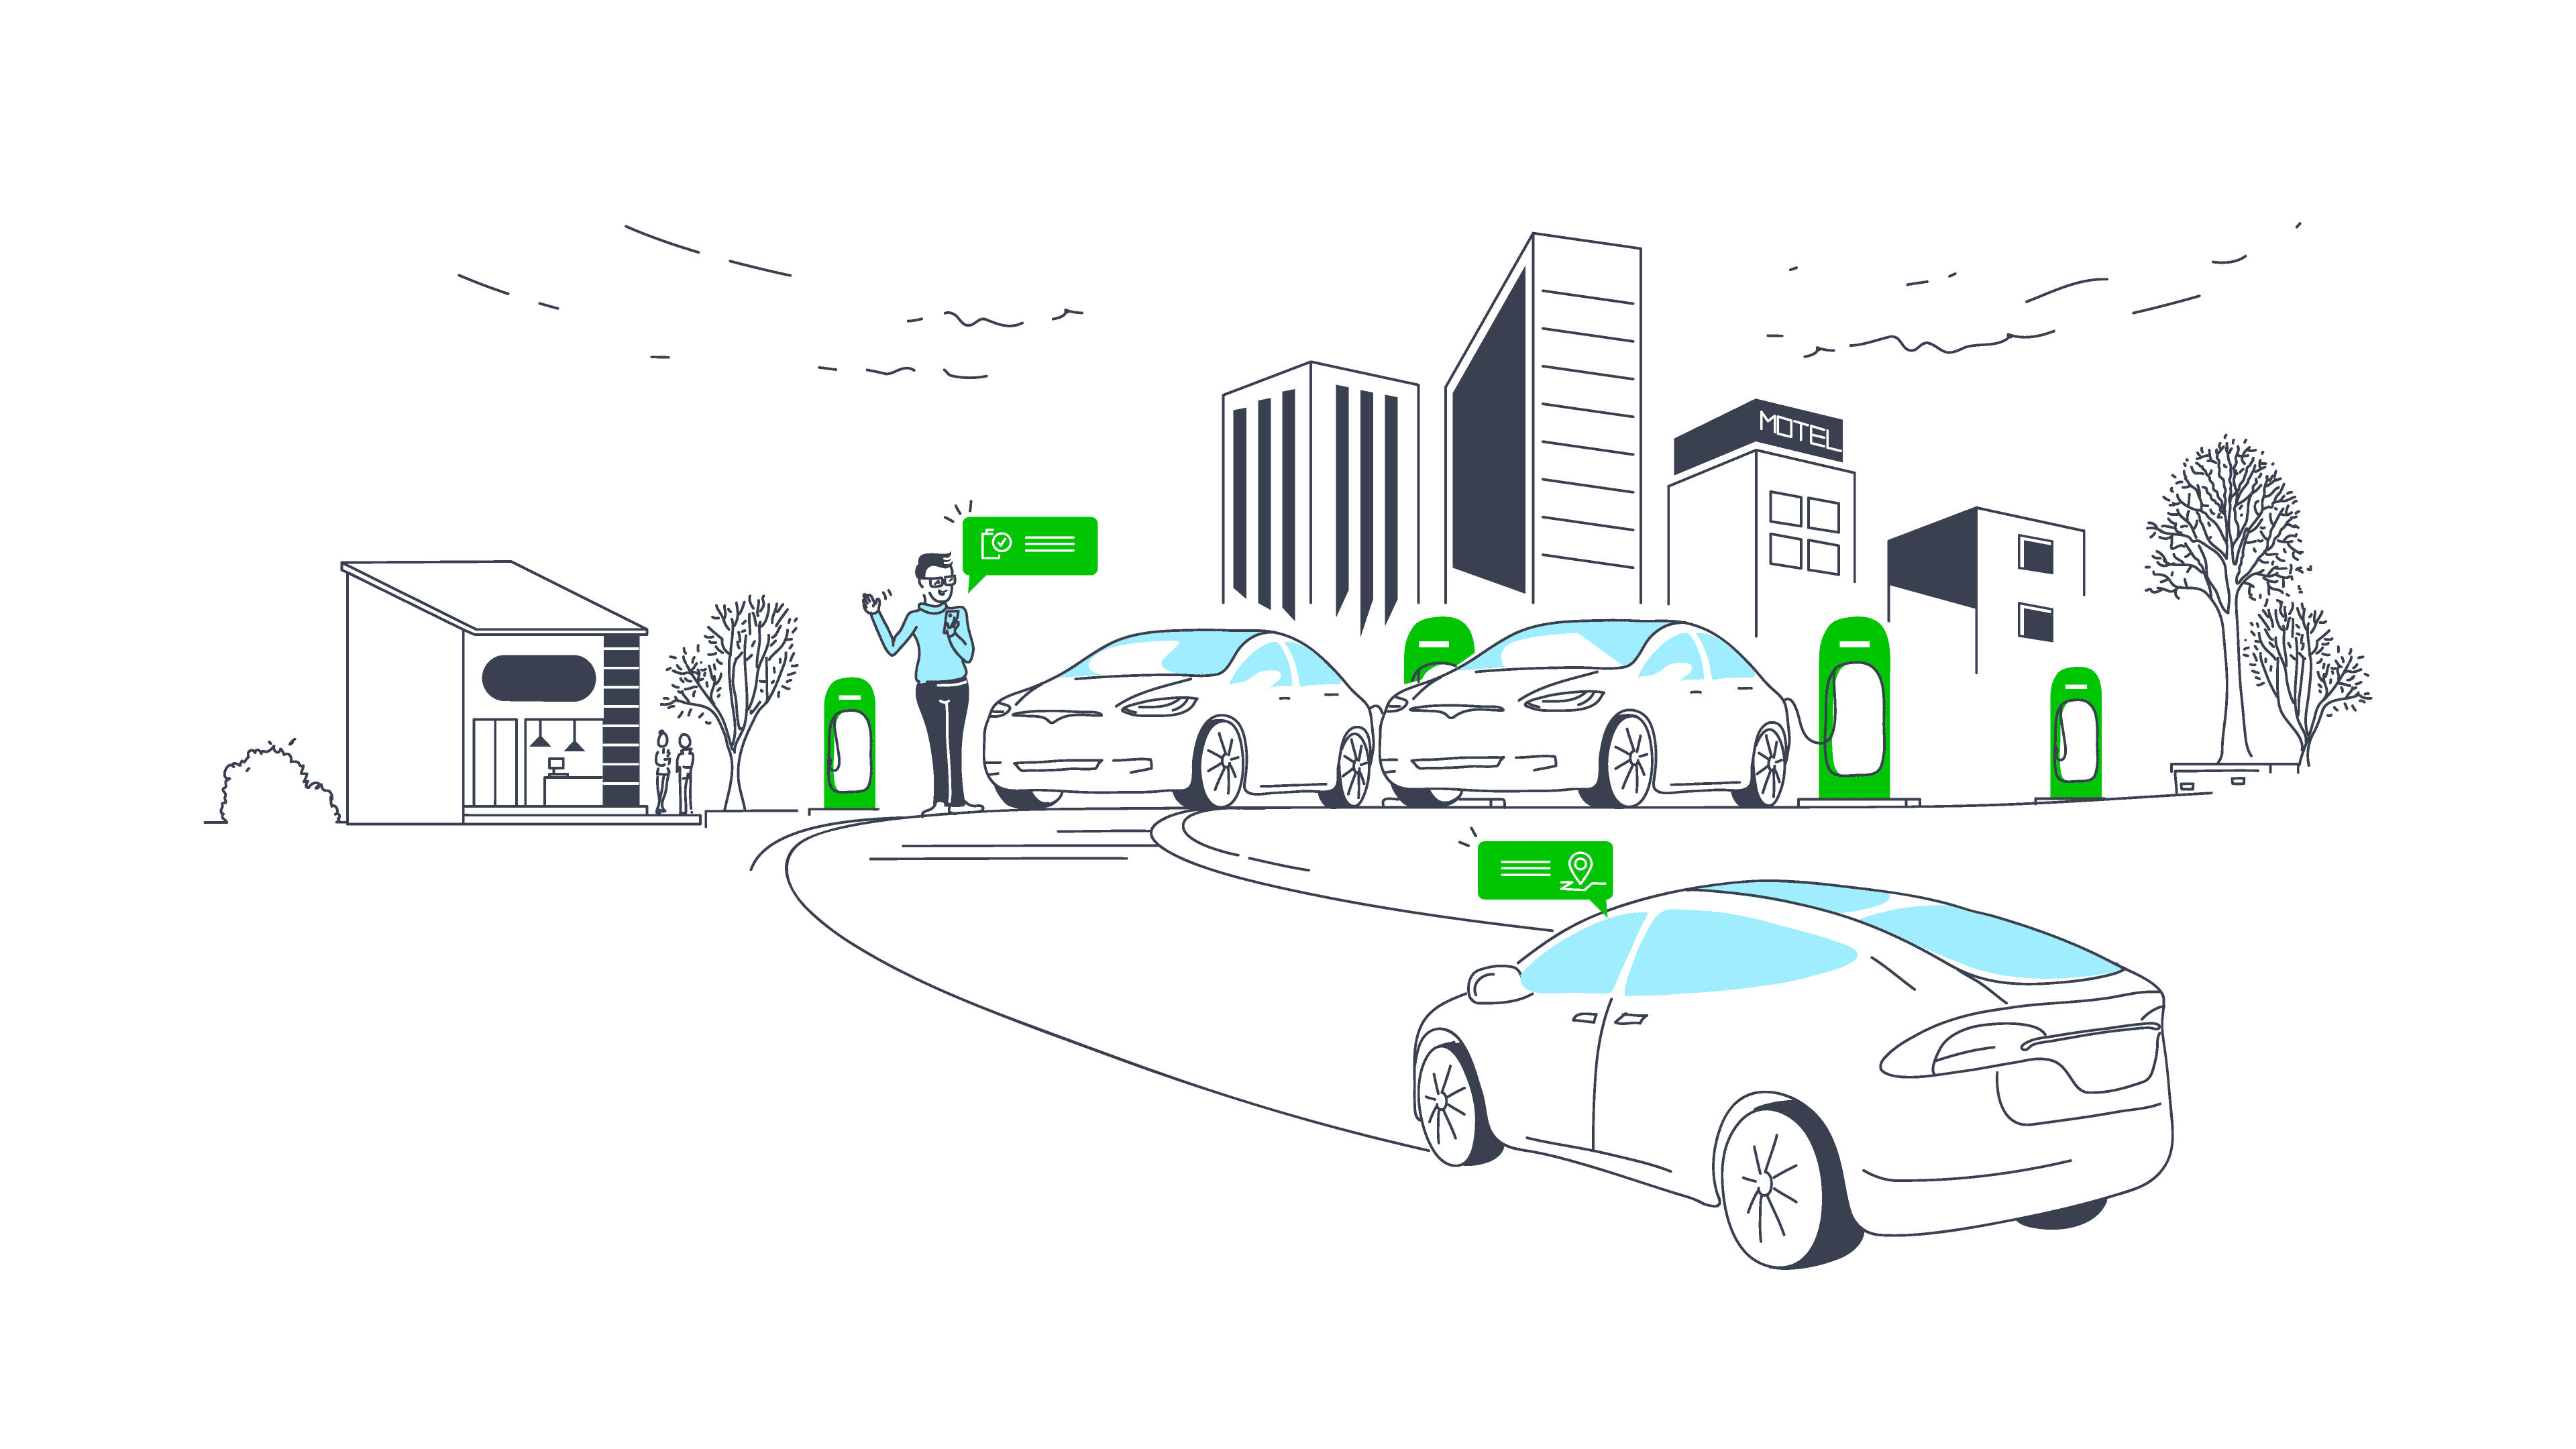 Relay EV hero image, showing a scene of drivers arriving and charging